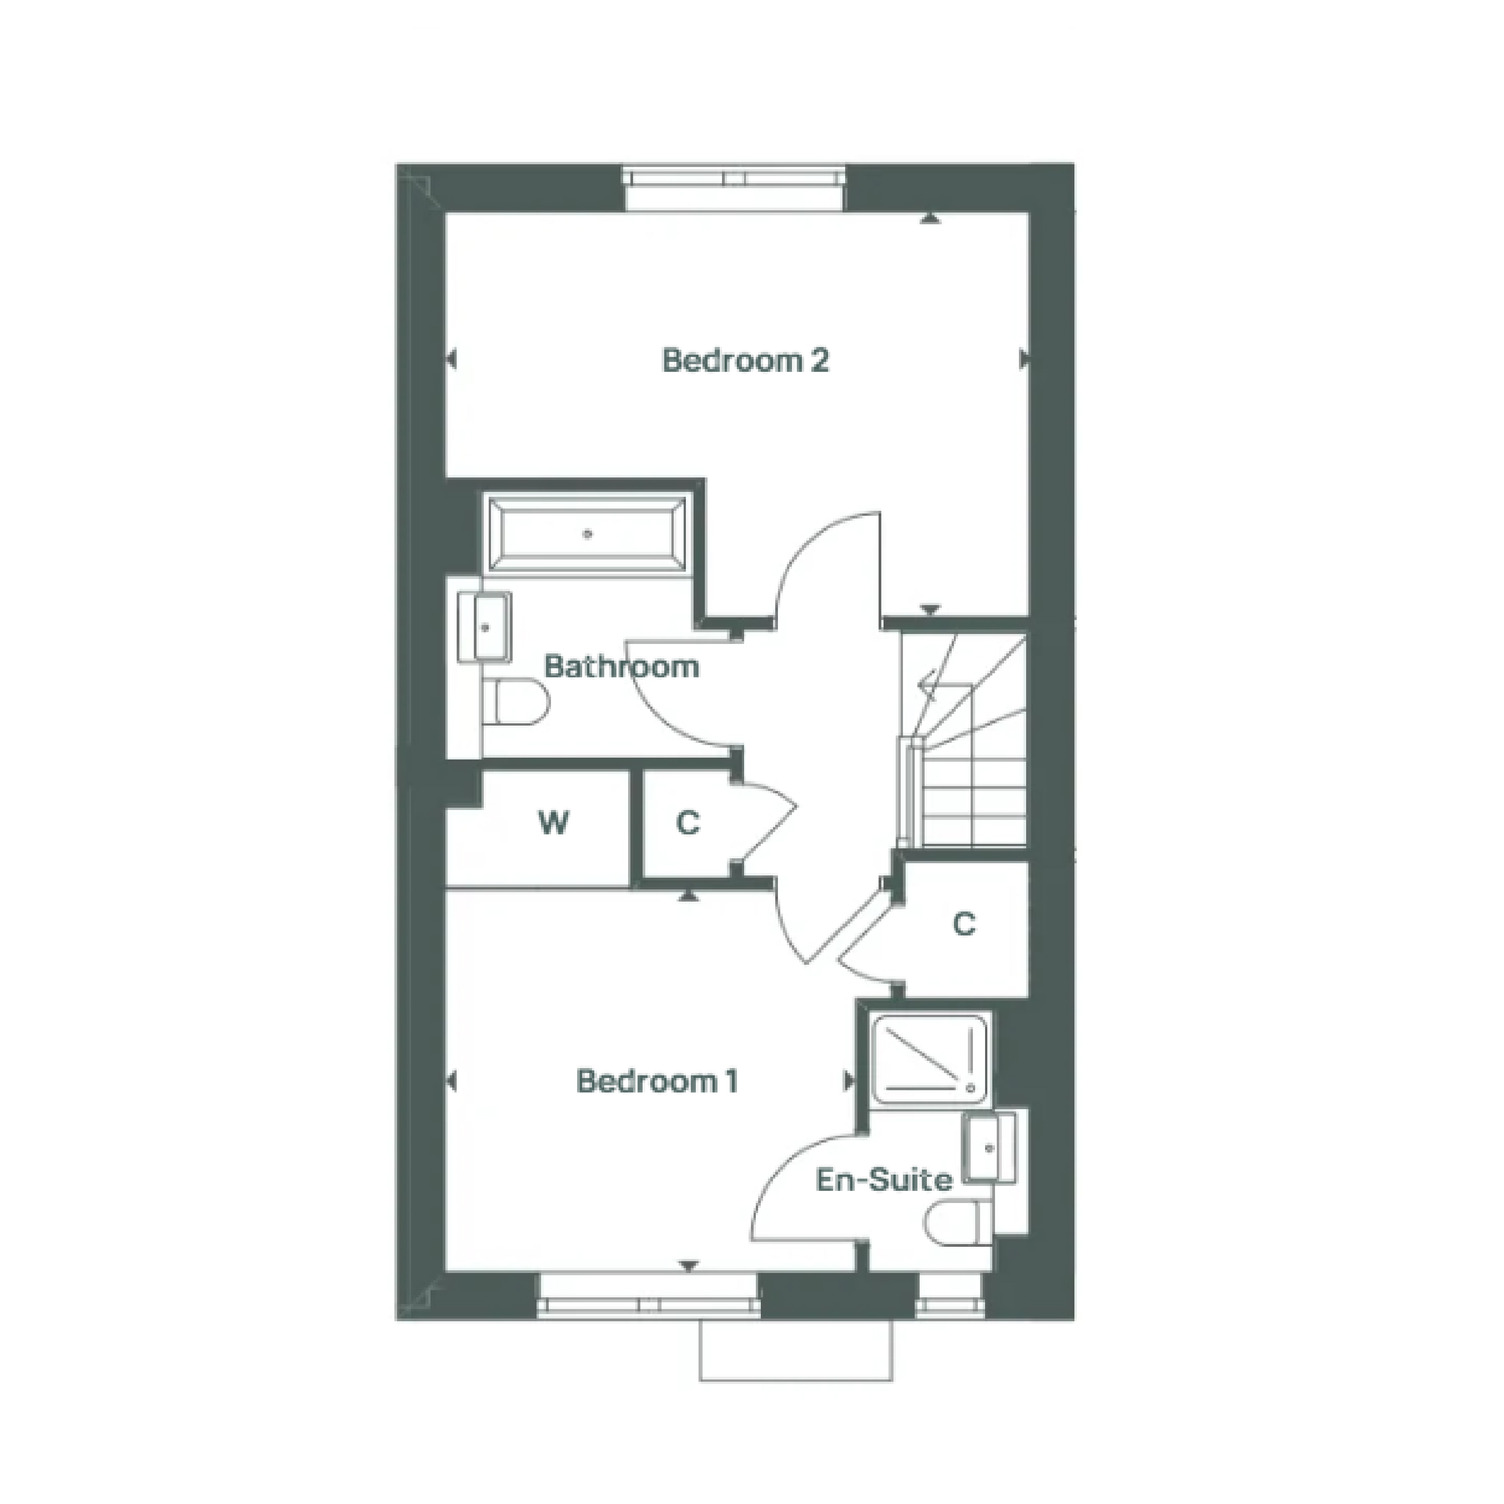 Coopers Hill 2 bed house variation plot 5,6 first floor-01-01